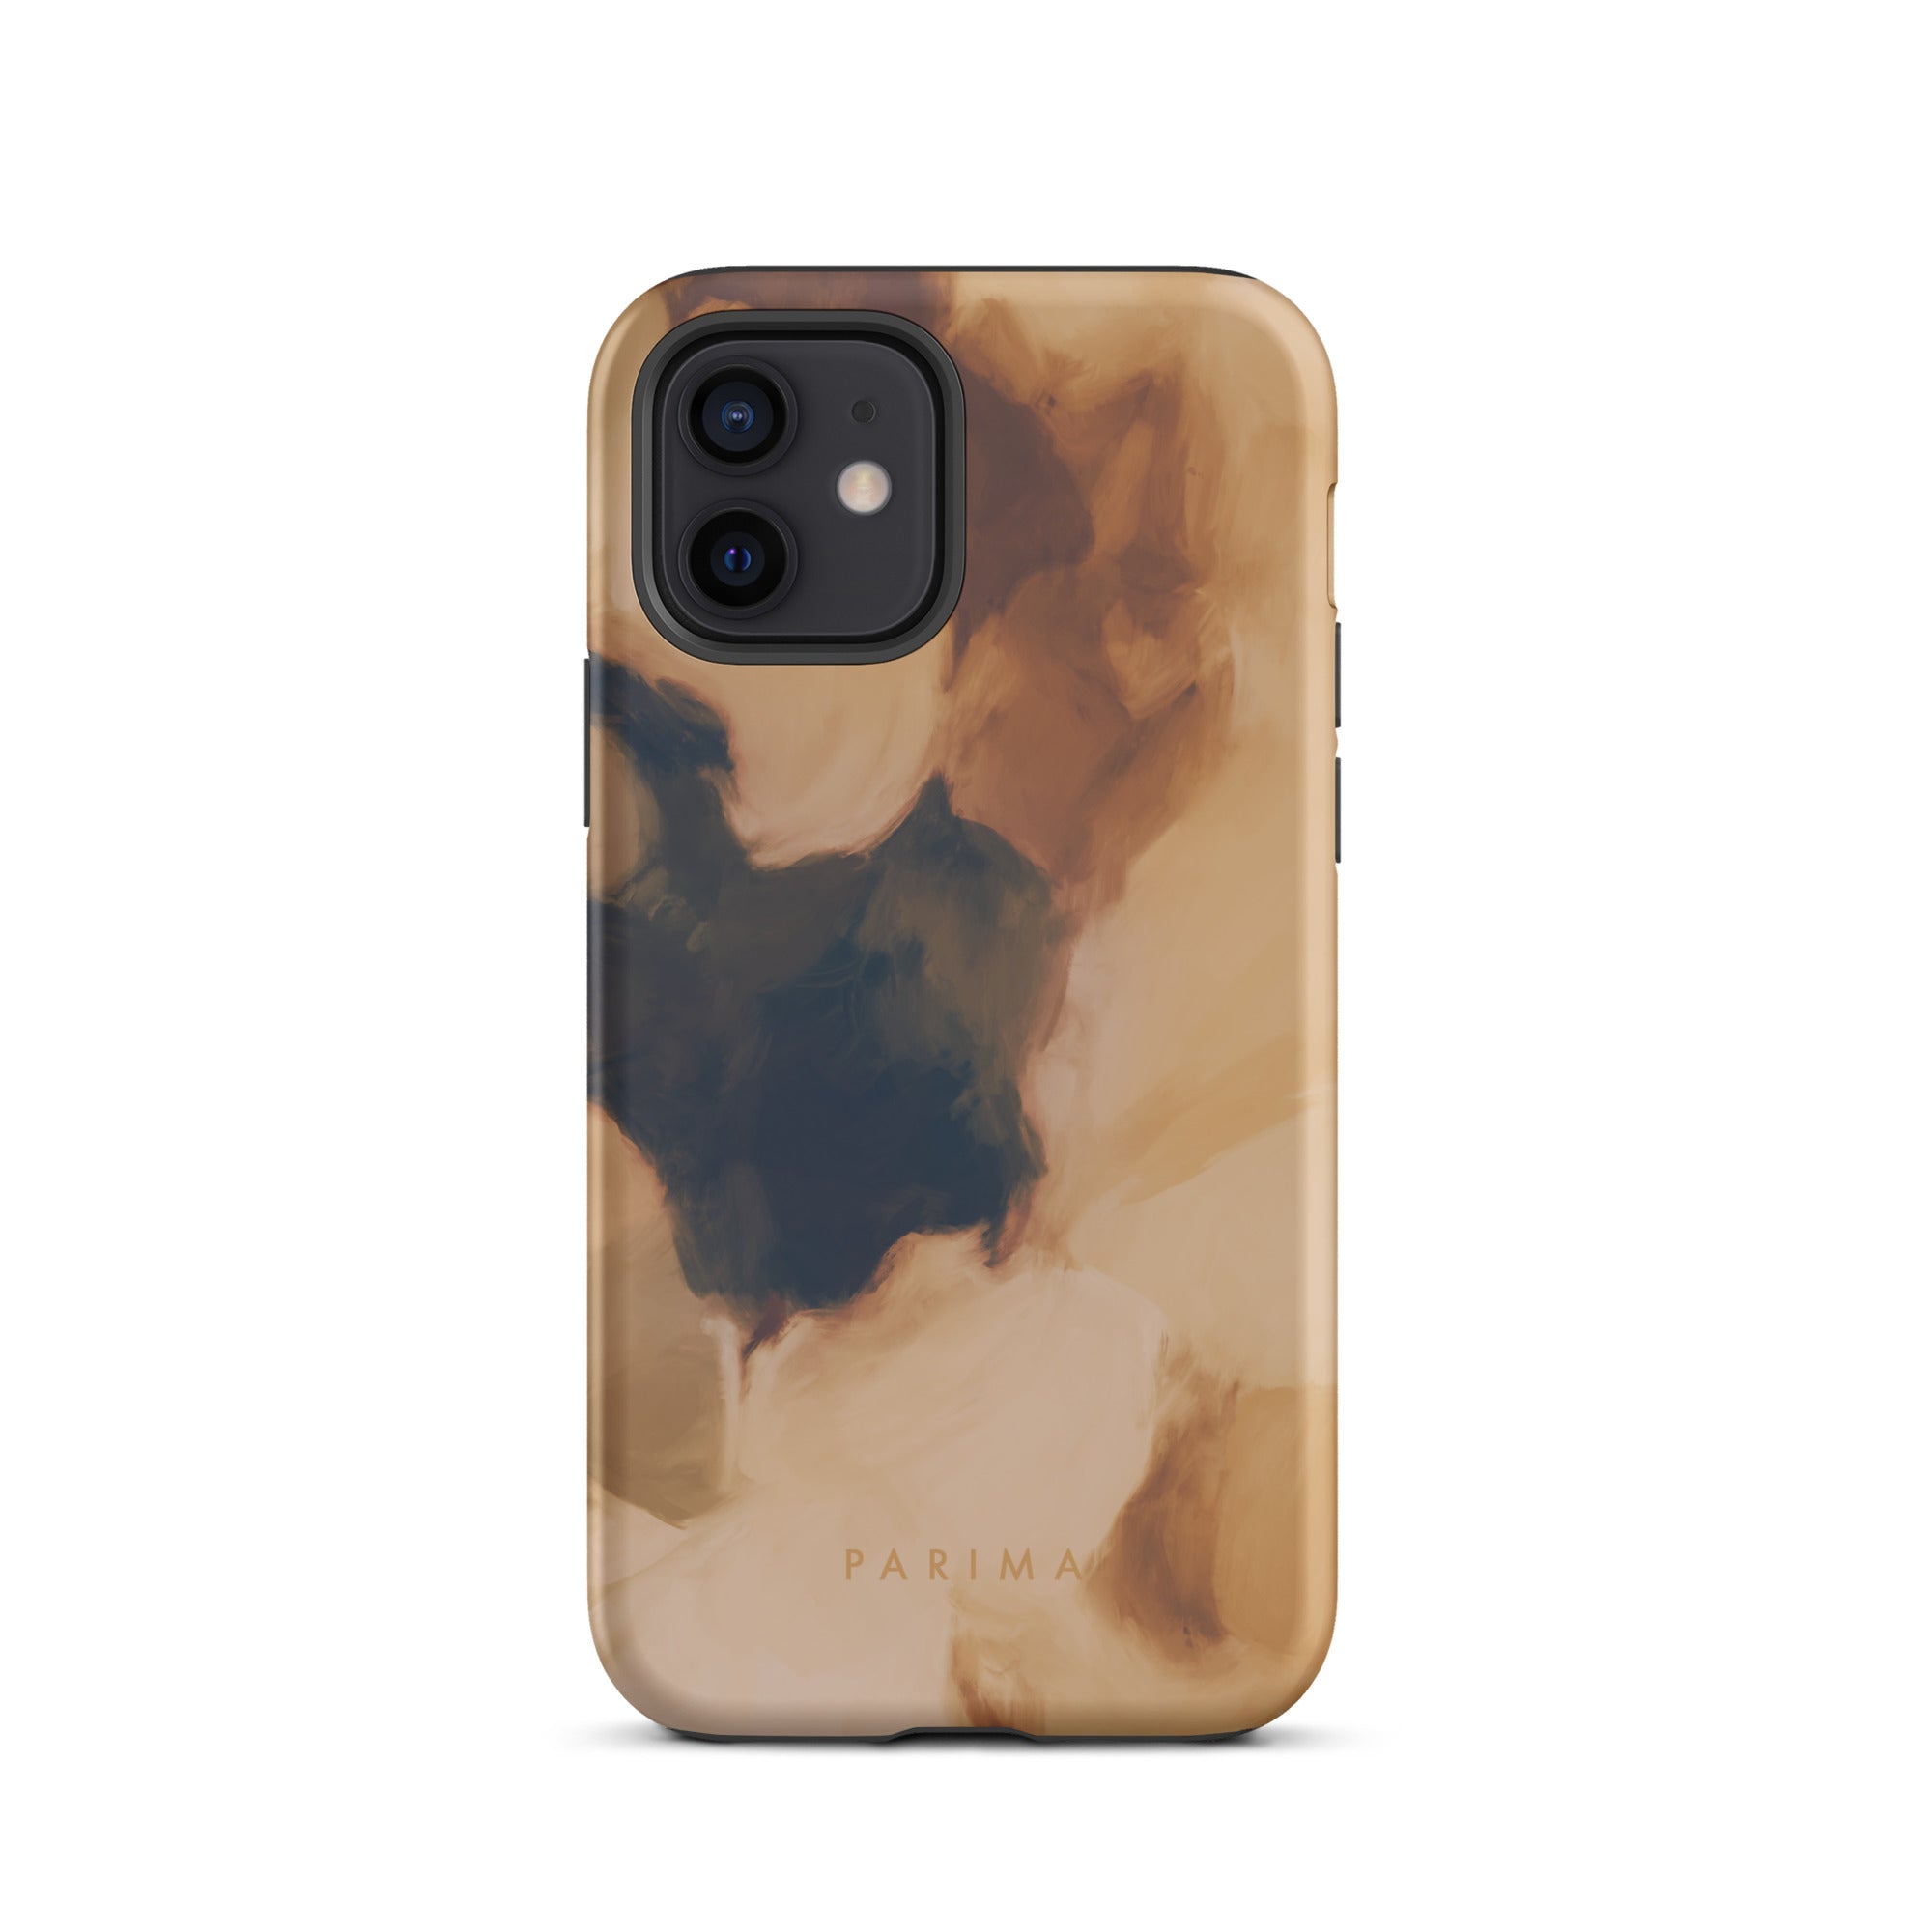 Clay, brown and tan color abstract art on iPhone 12 tough case by Parima Studio